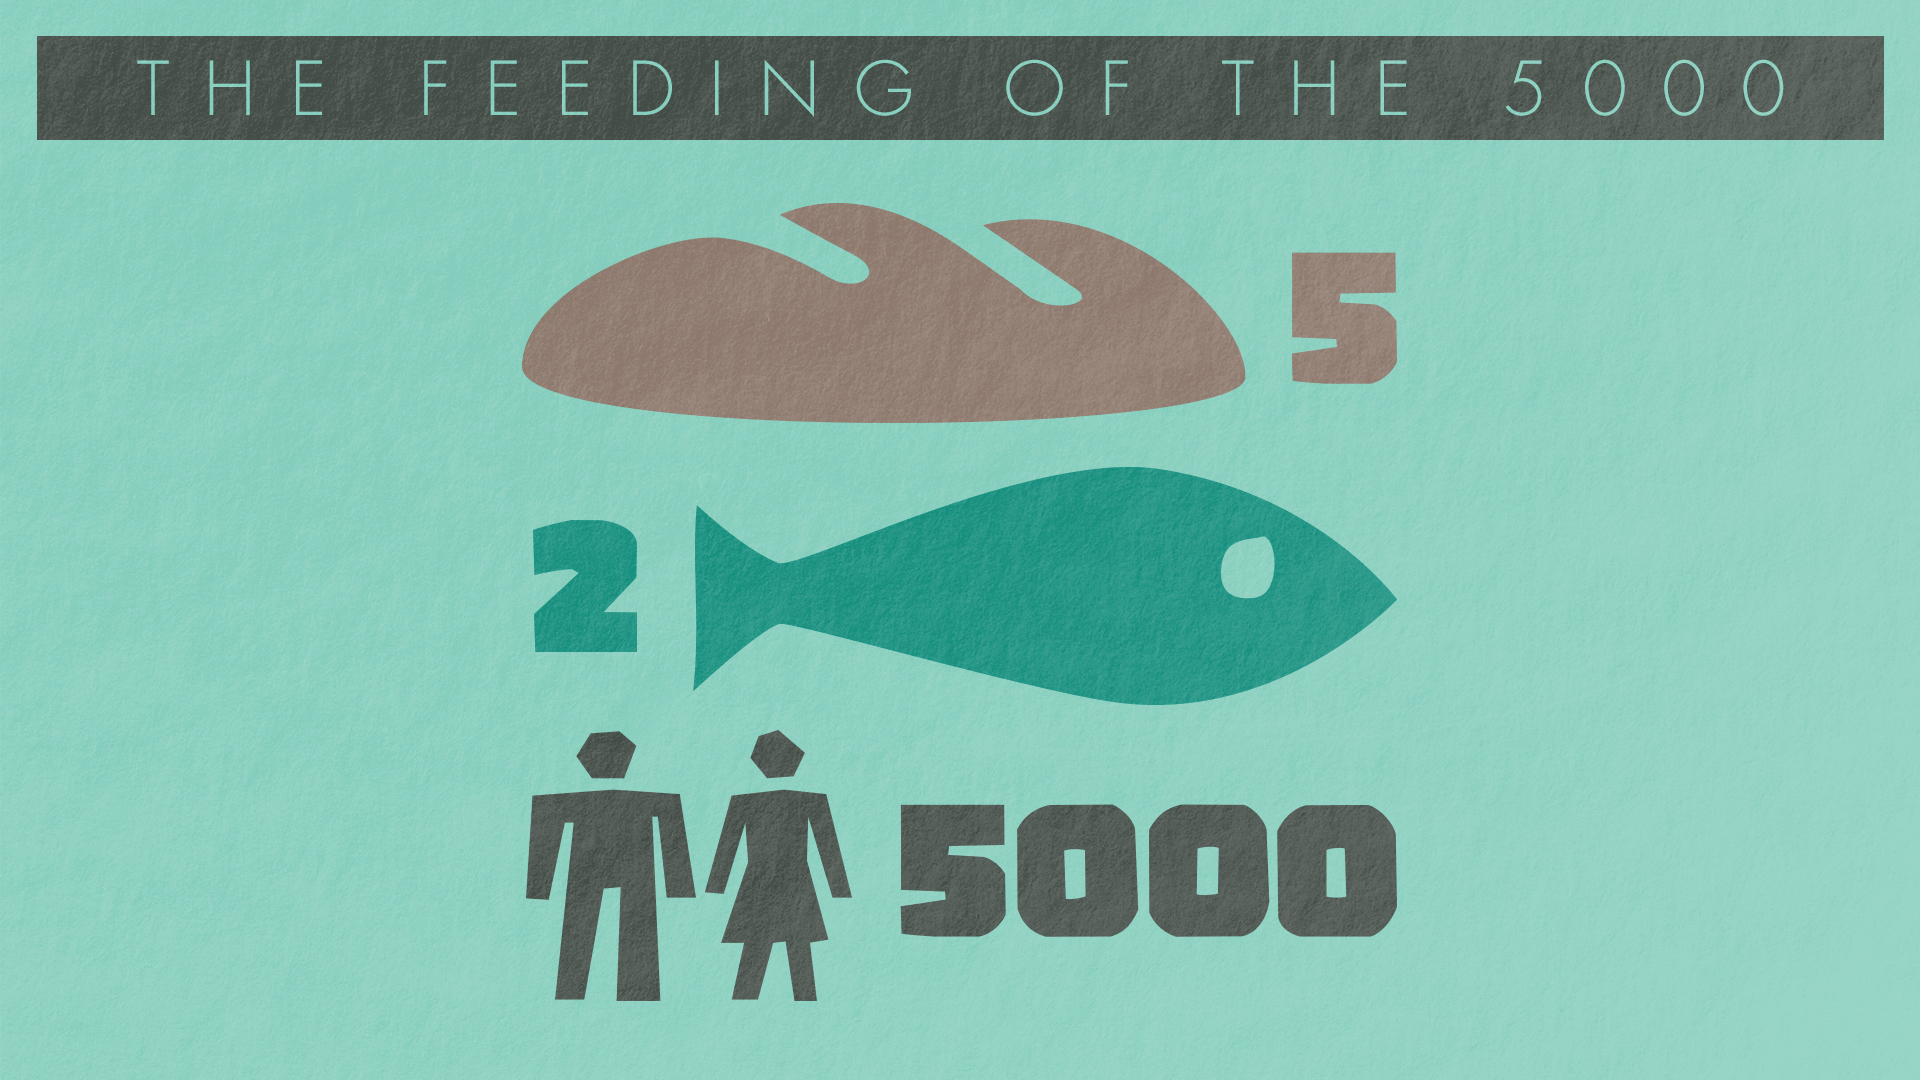 The Feeding of the 5000